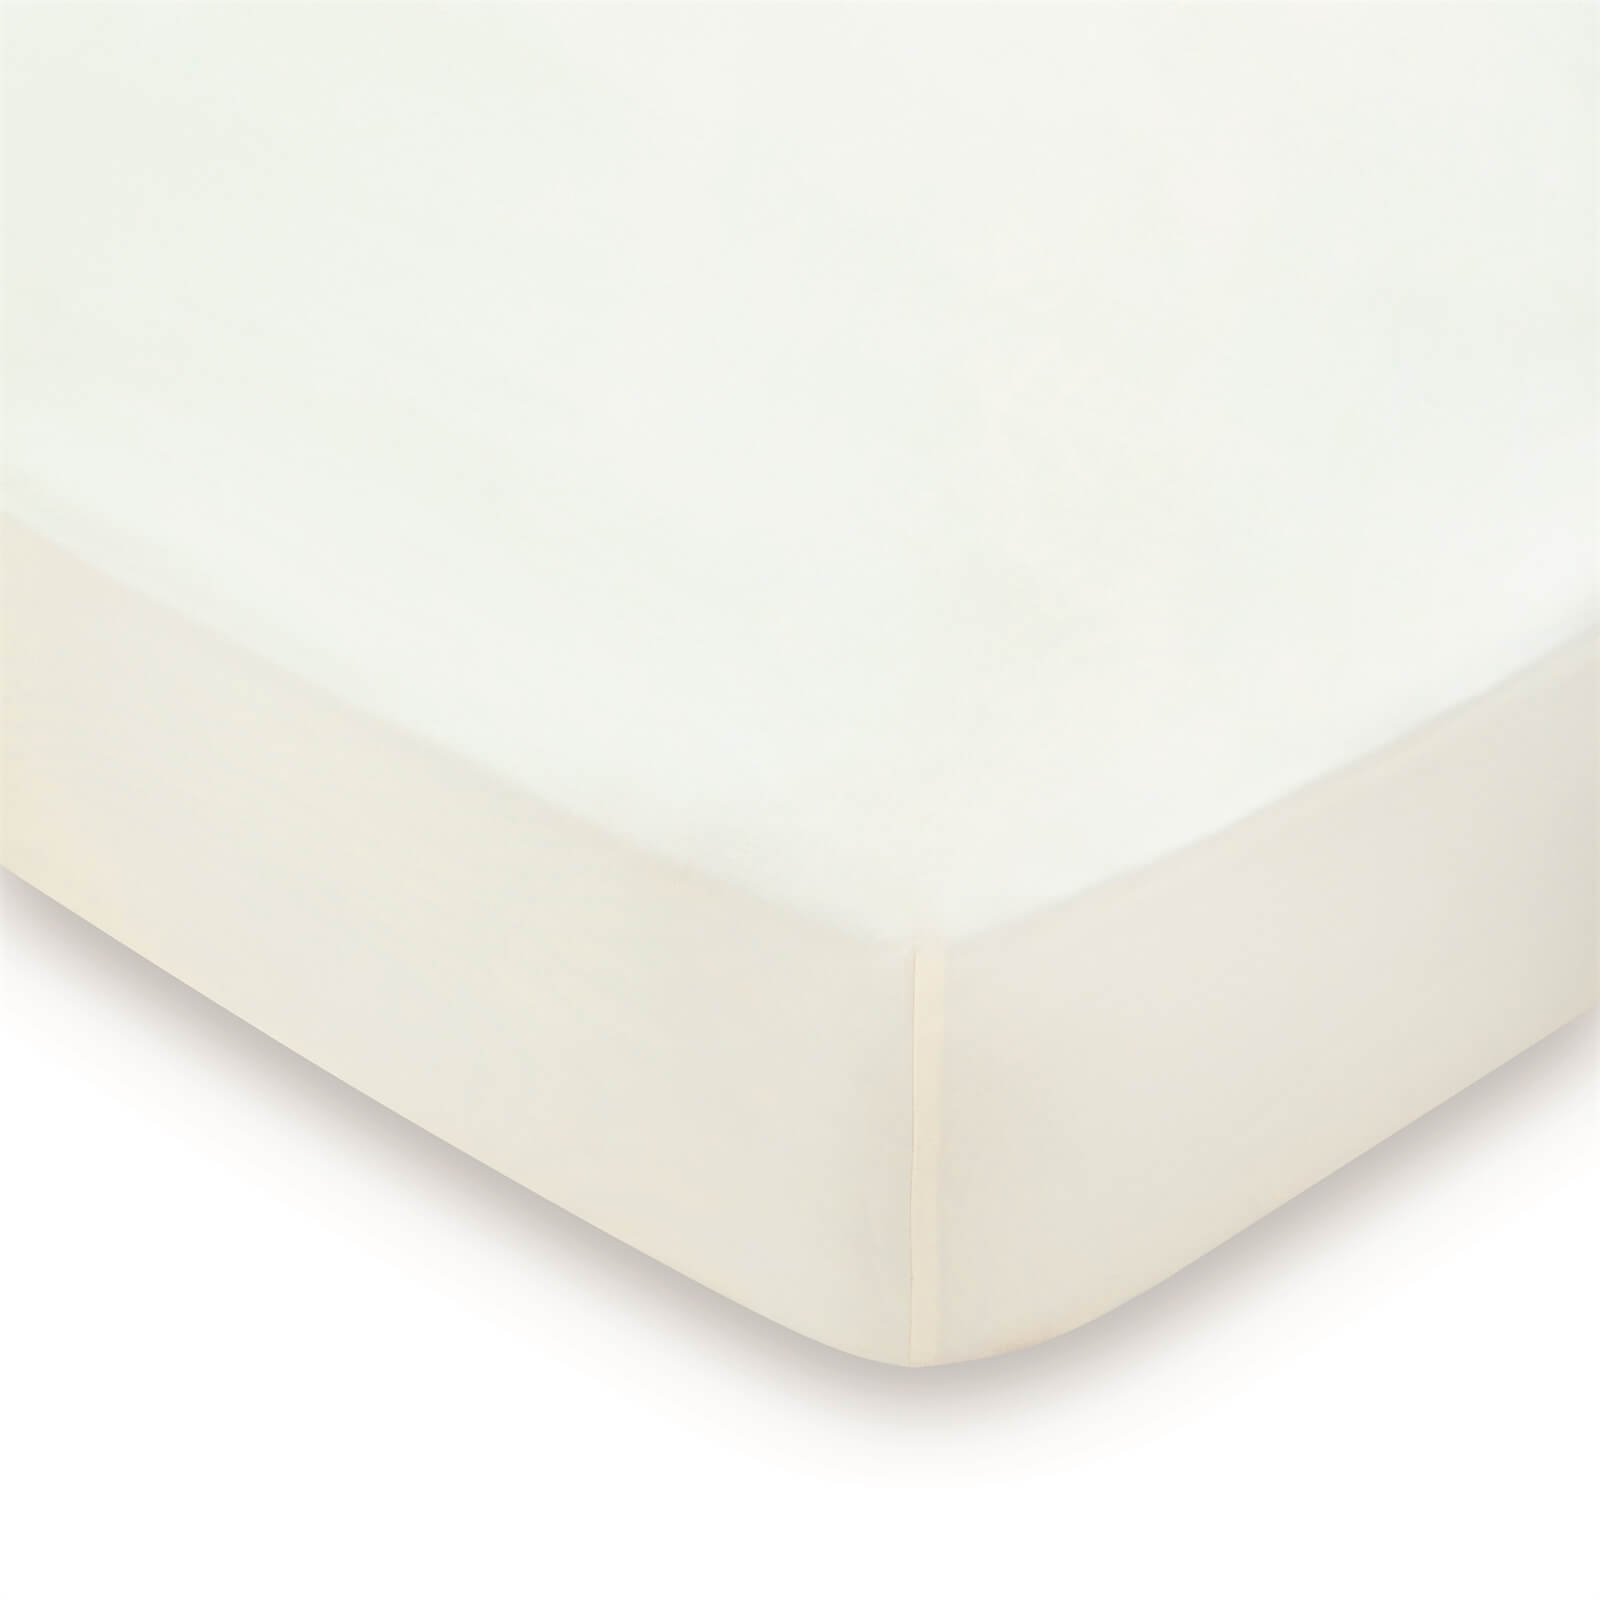 Peacock Blue Hotel 600 Thread Count Plain Dye Fitted Sheet - Double - Ivory